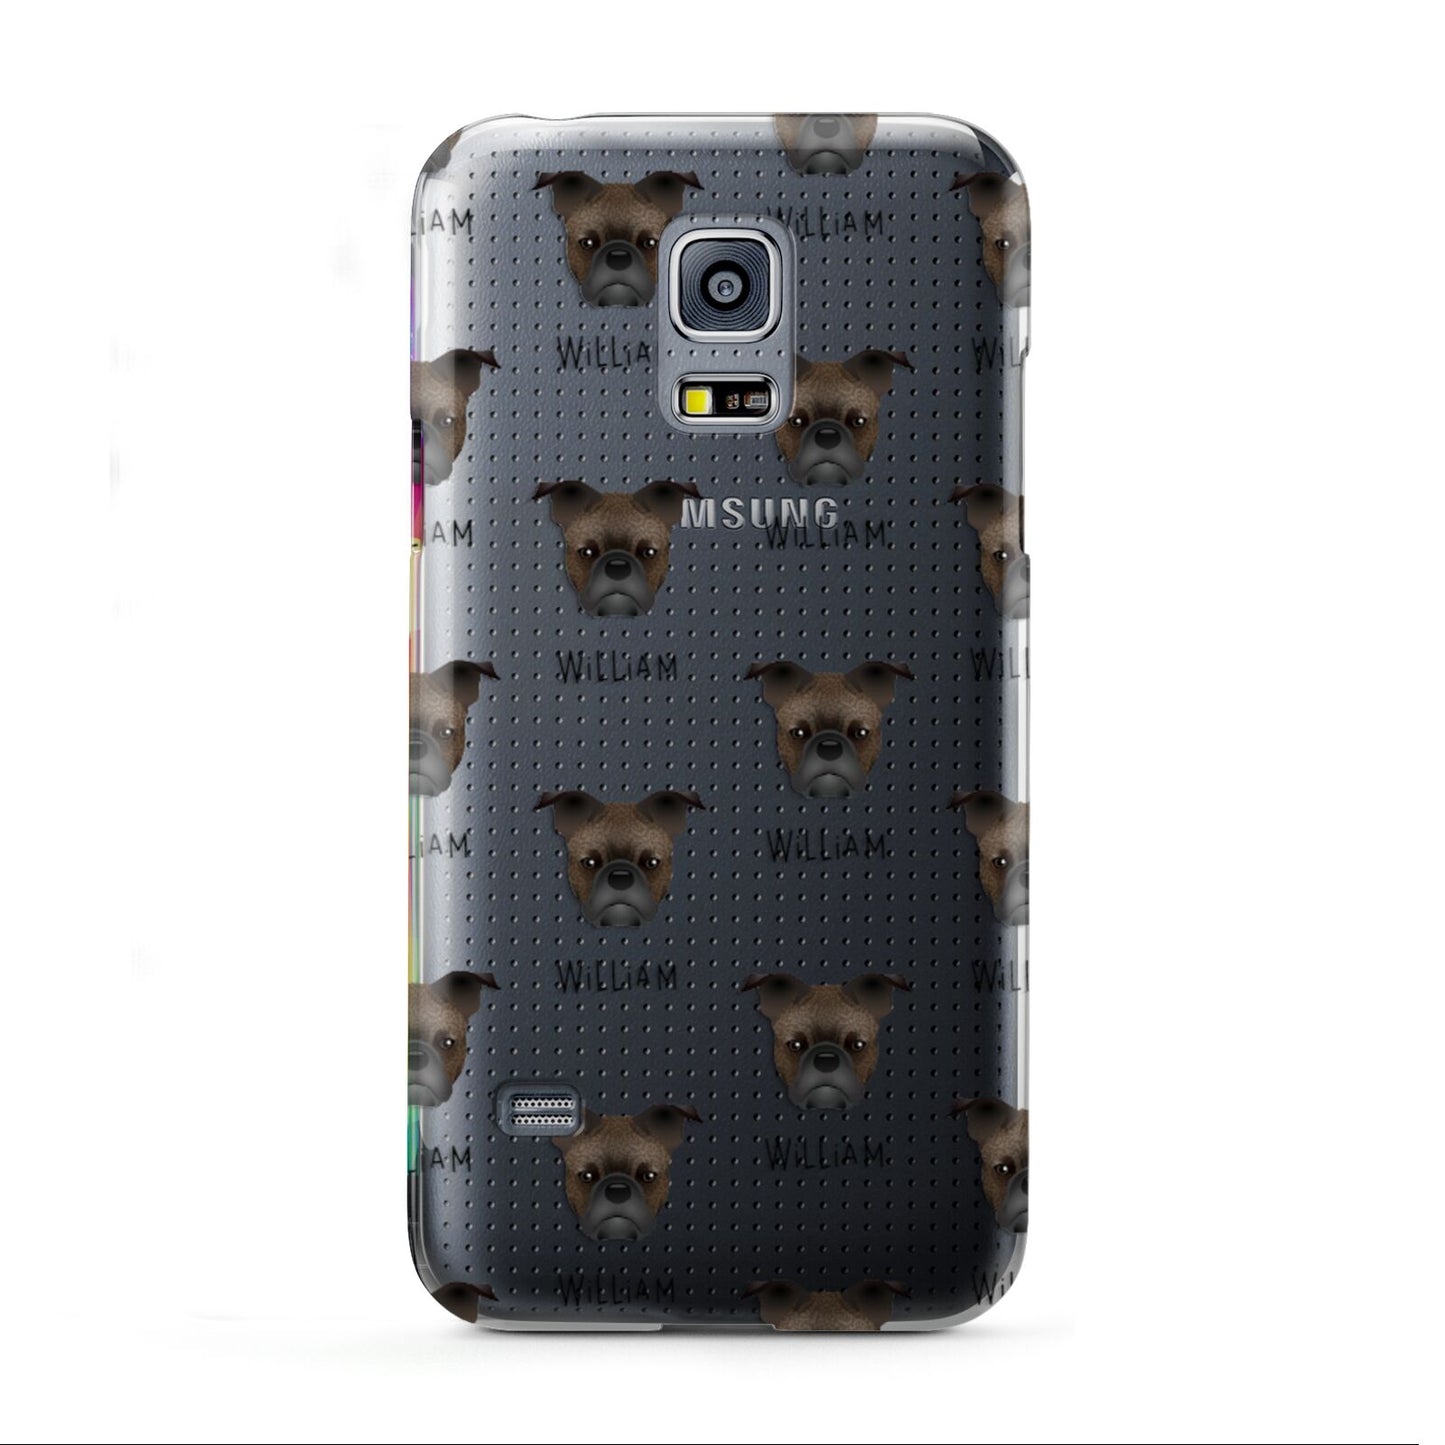 Frug Icon with Name Samsung Galaxy S5 Mini Case